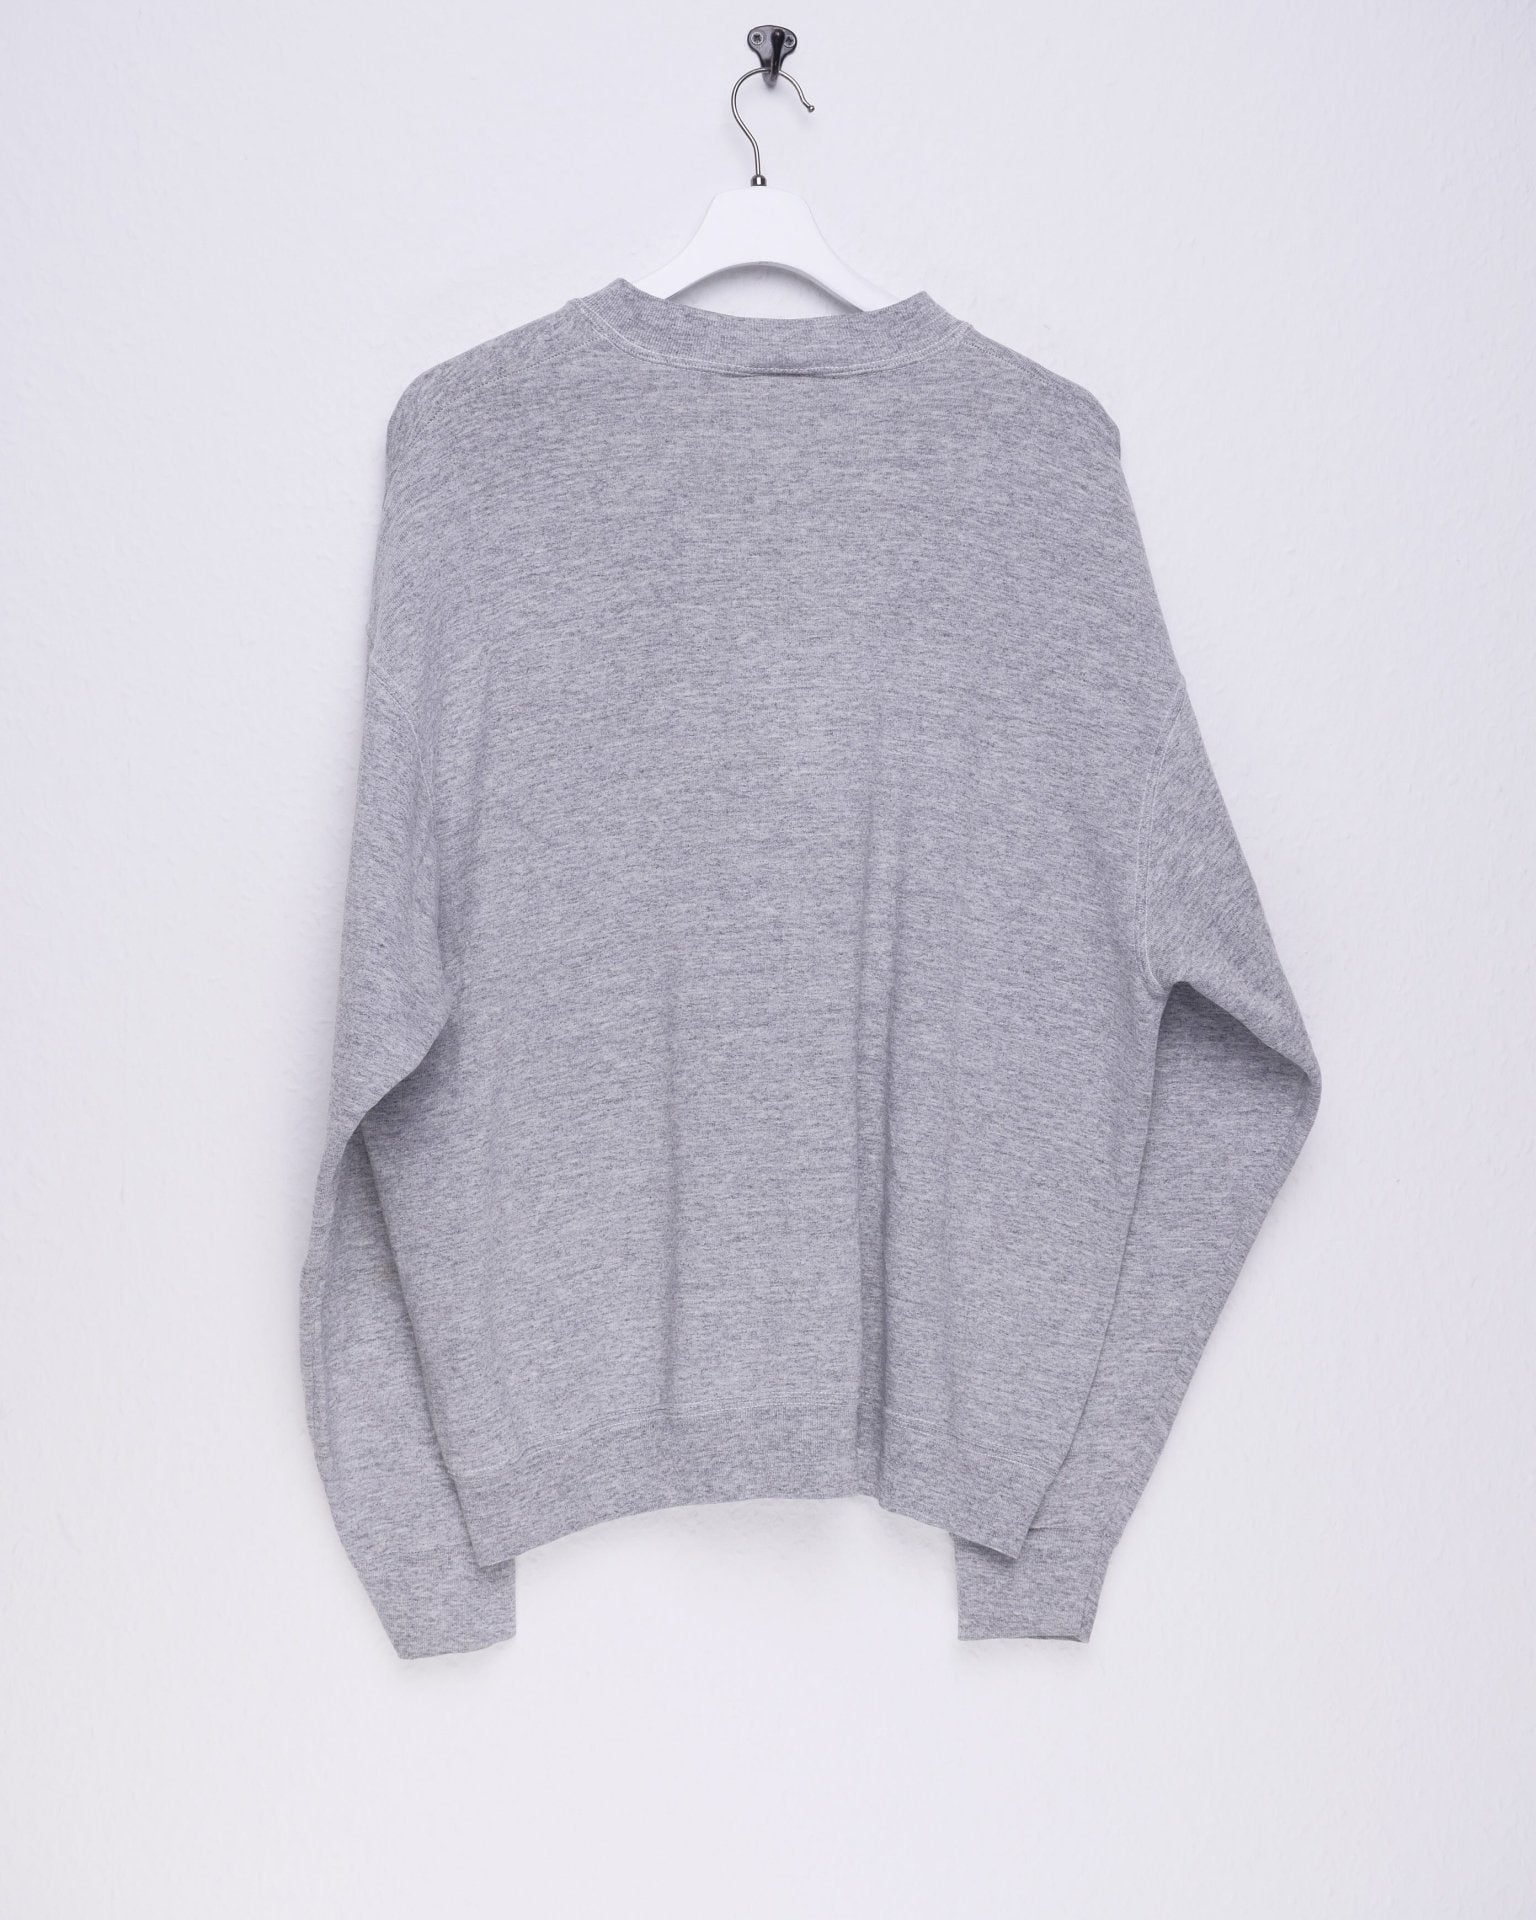 'Wilson' embroidered Spellout grey Sweater - Peeces